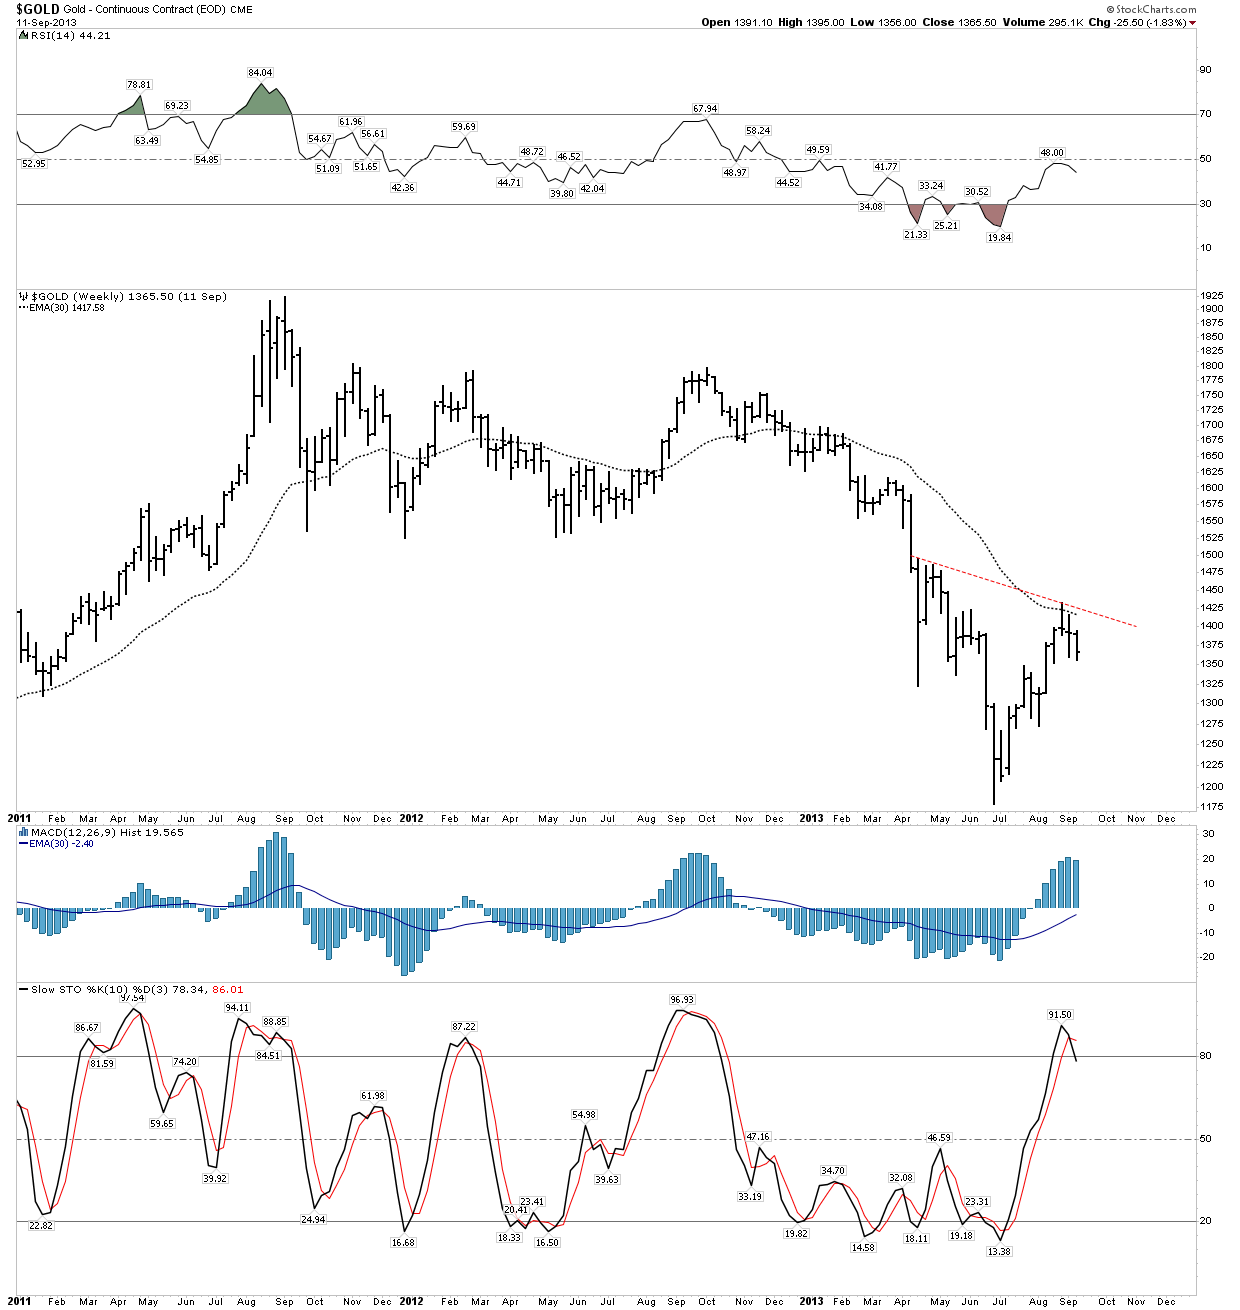 Gold Weekly 2011-2017